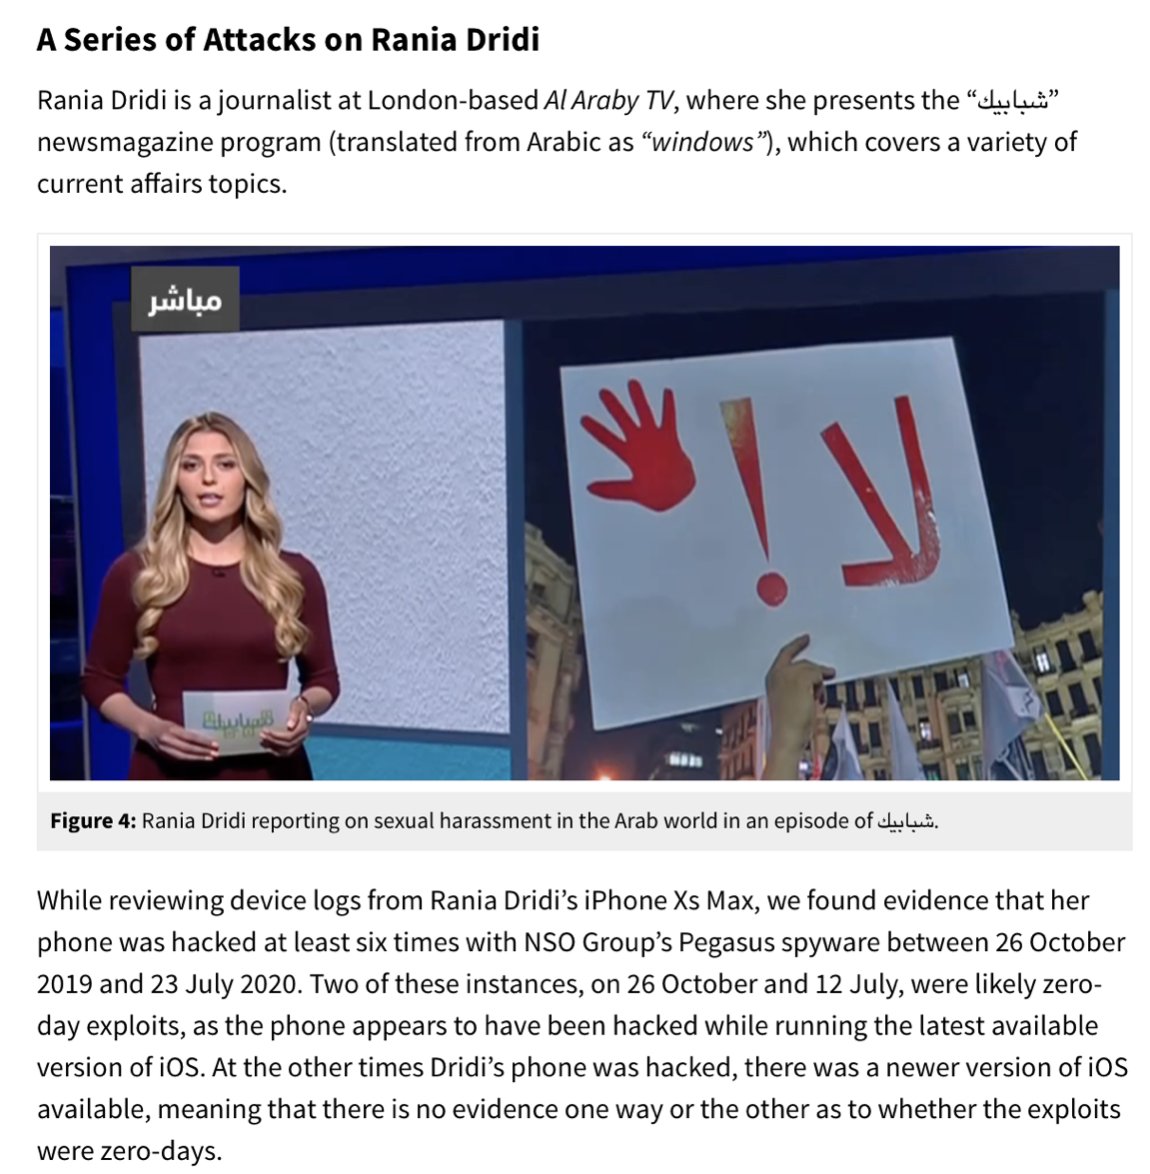 (6) ALSO HACKED: Rania Dridi, presenter at  @AlarabyTV was hacked at least six times between October 2019-July 2020.